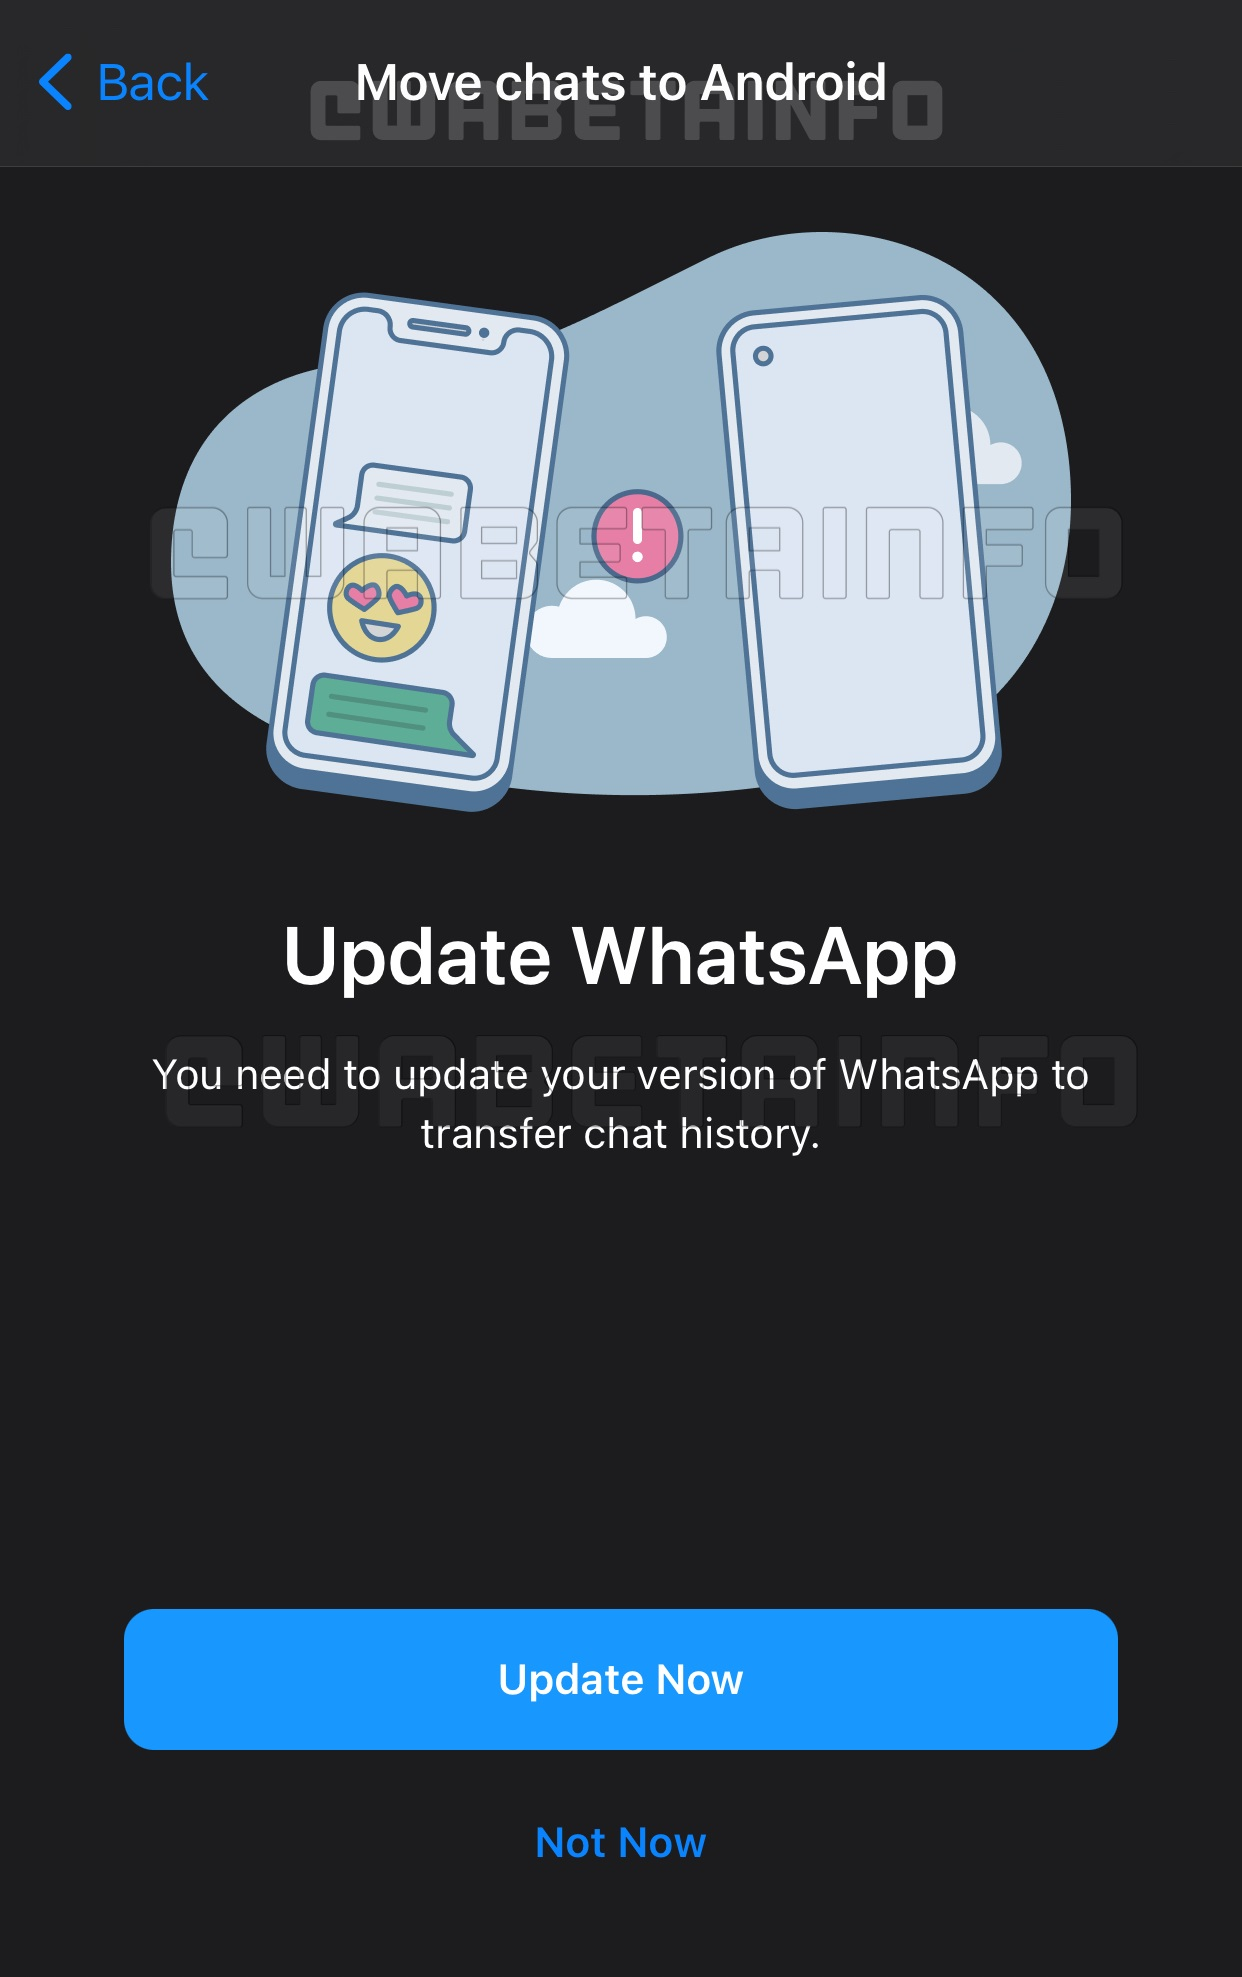 Move Chat To Android - Update Whatsapp